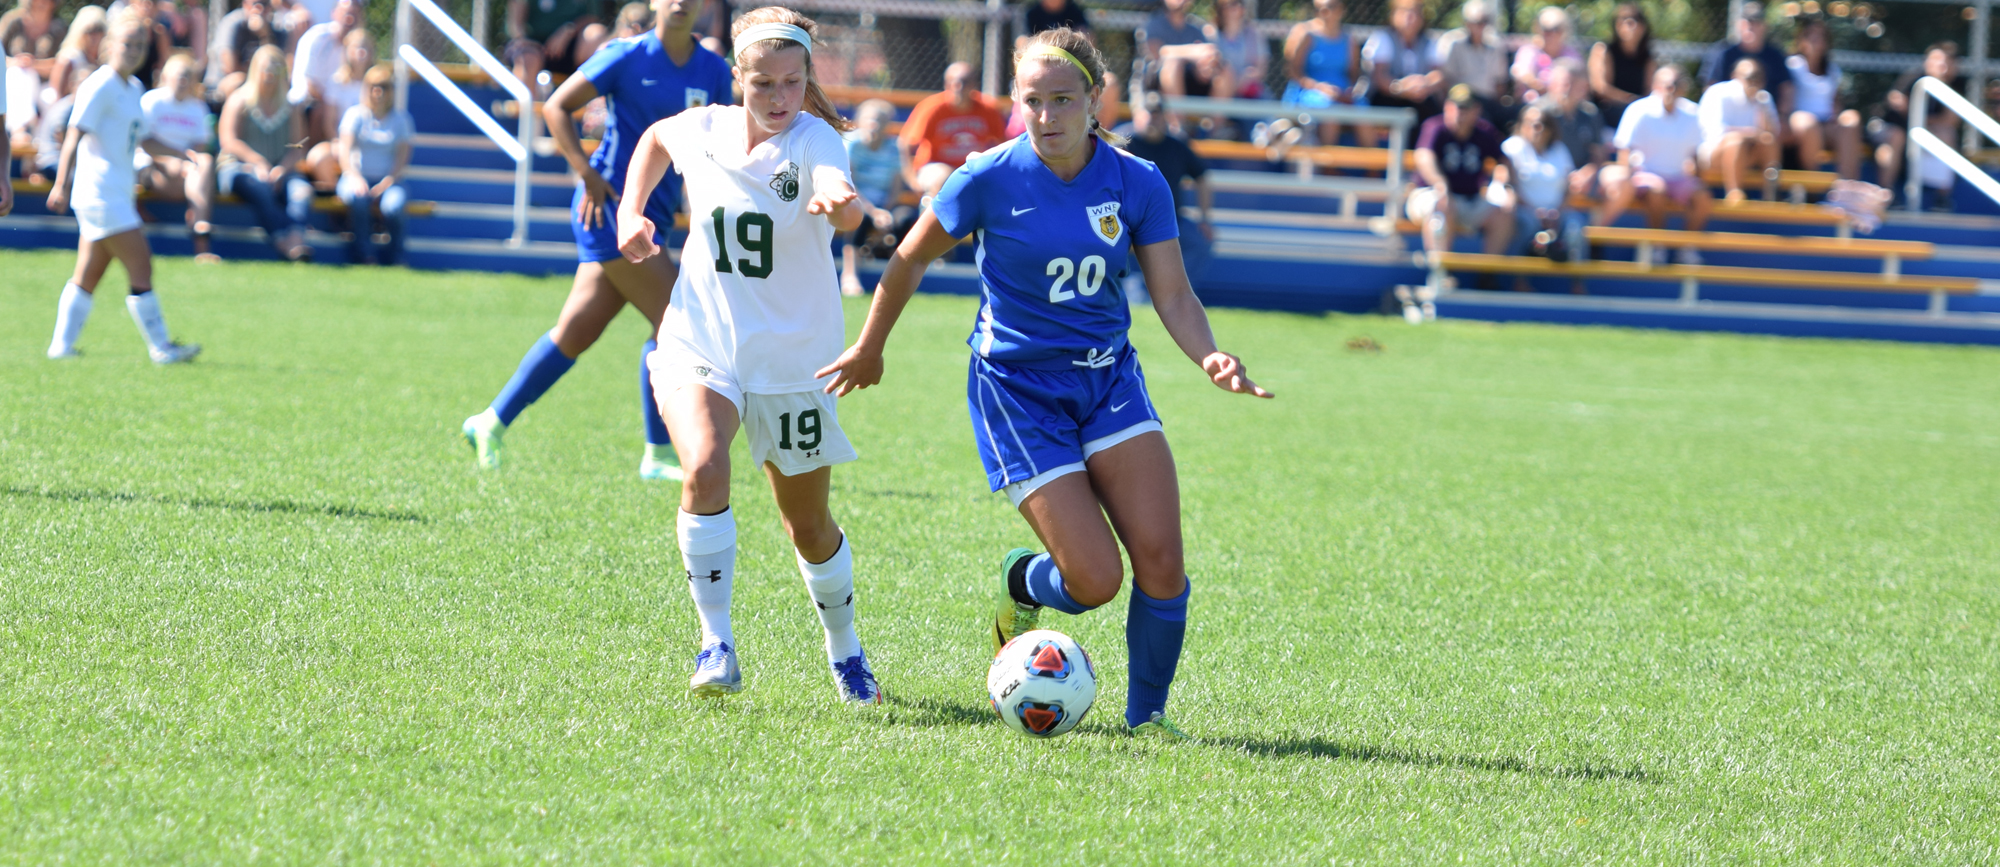 Western New England Plays to 1-1 Draw with Castleton